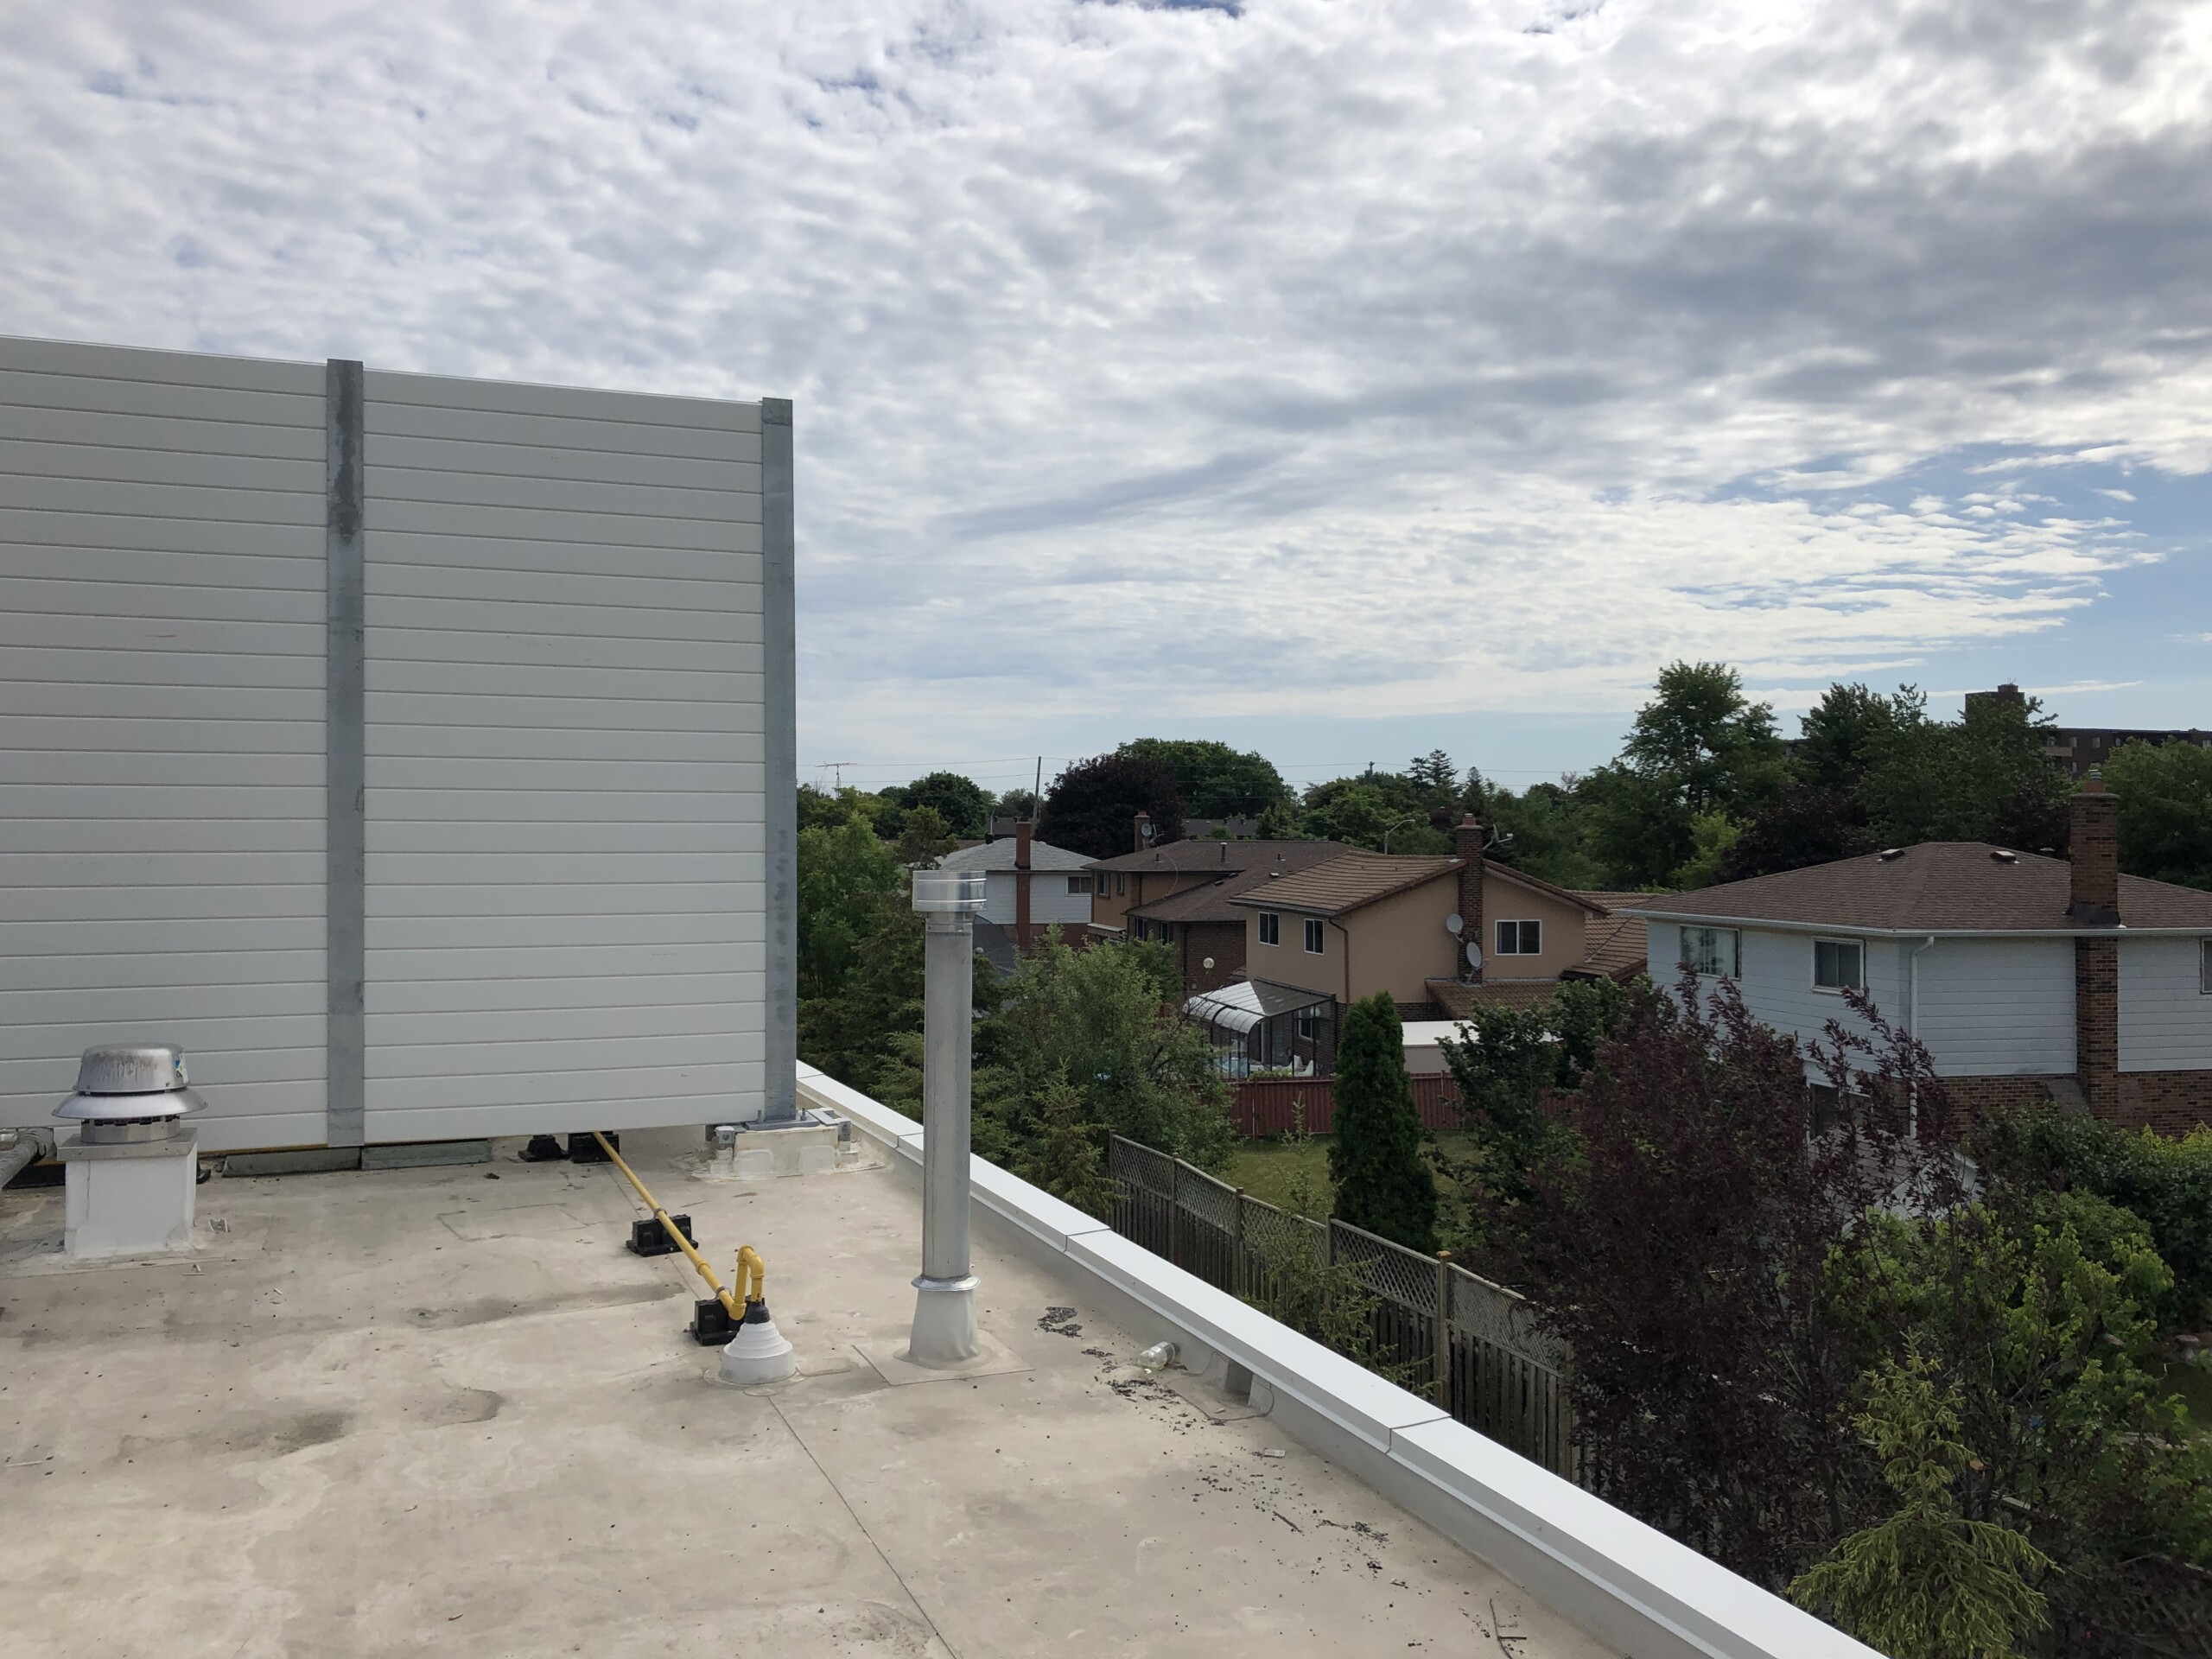 PVC post-and-panel rooftop noise barrier system on the roof of a food processing facility in the Greater Toronto Area, ON.